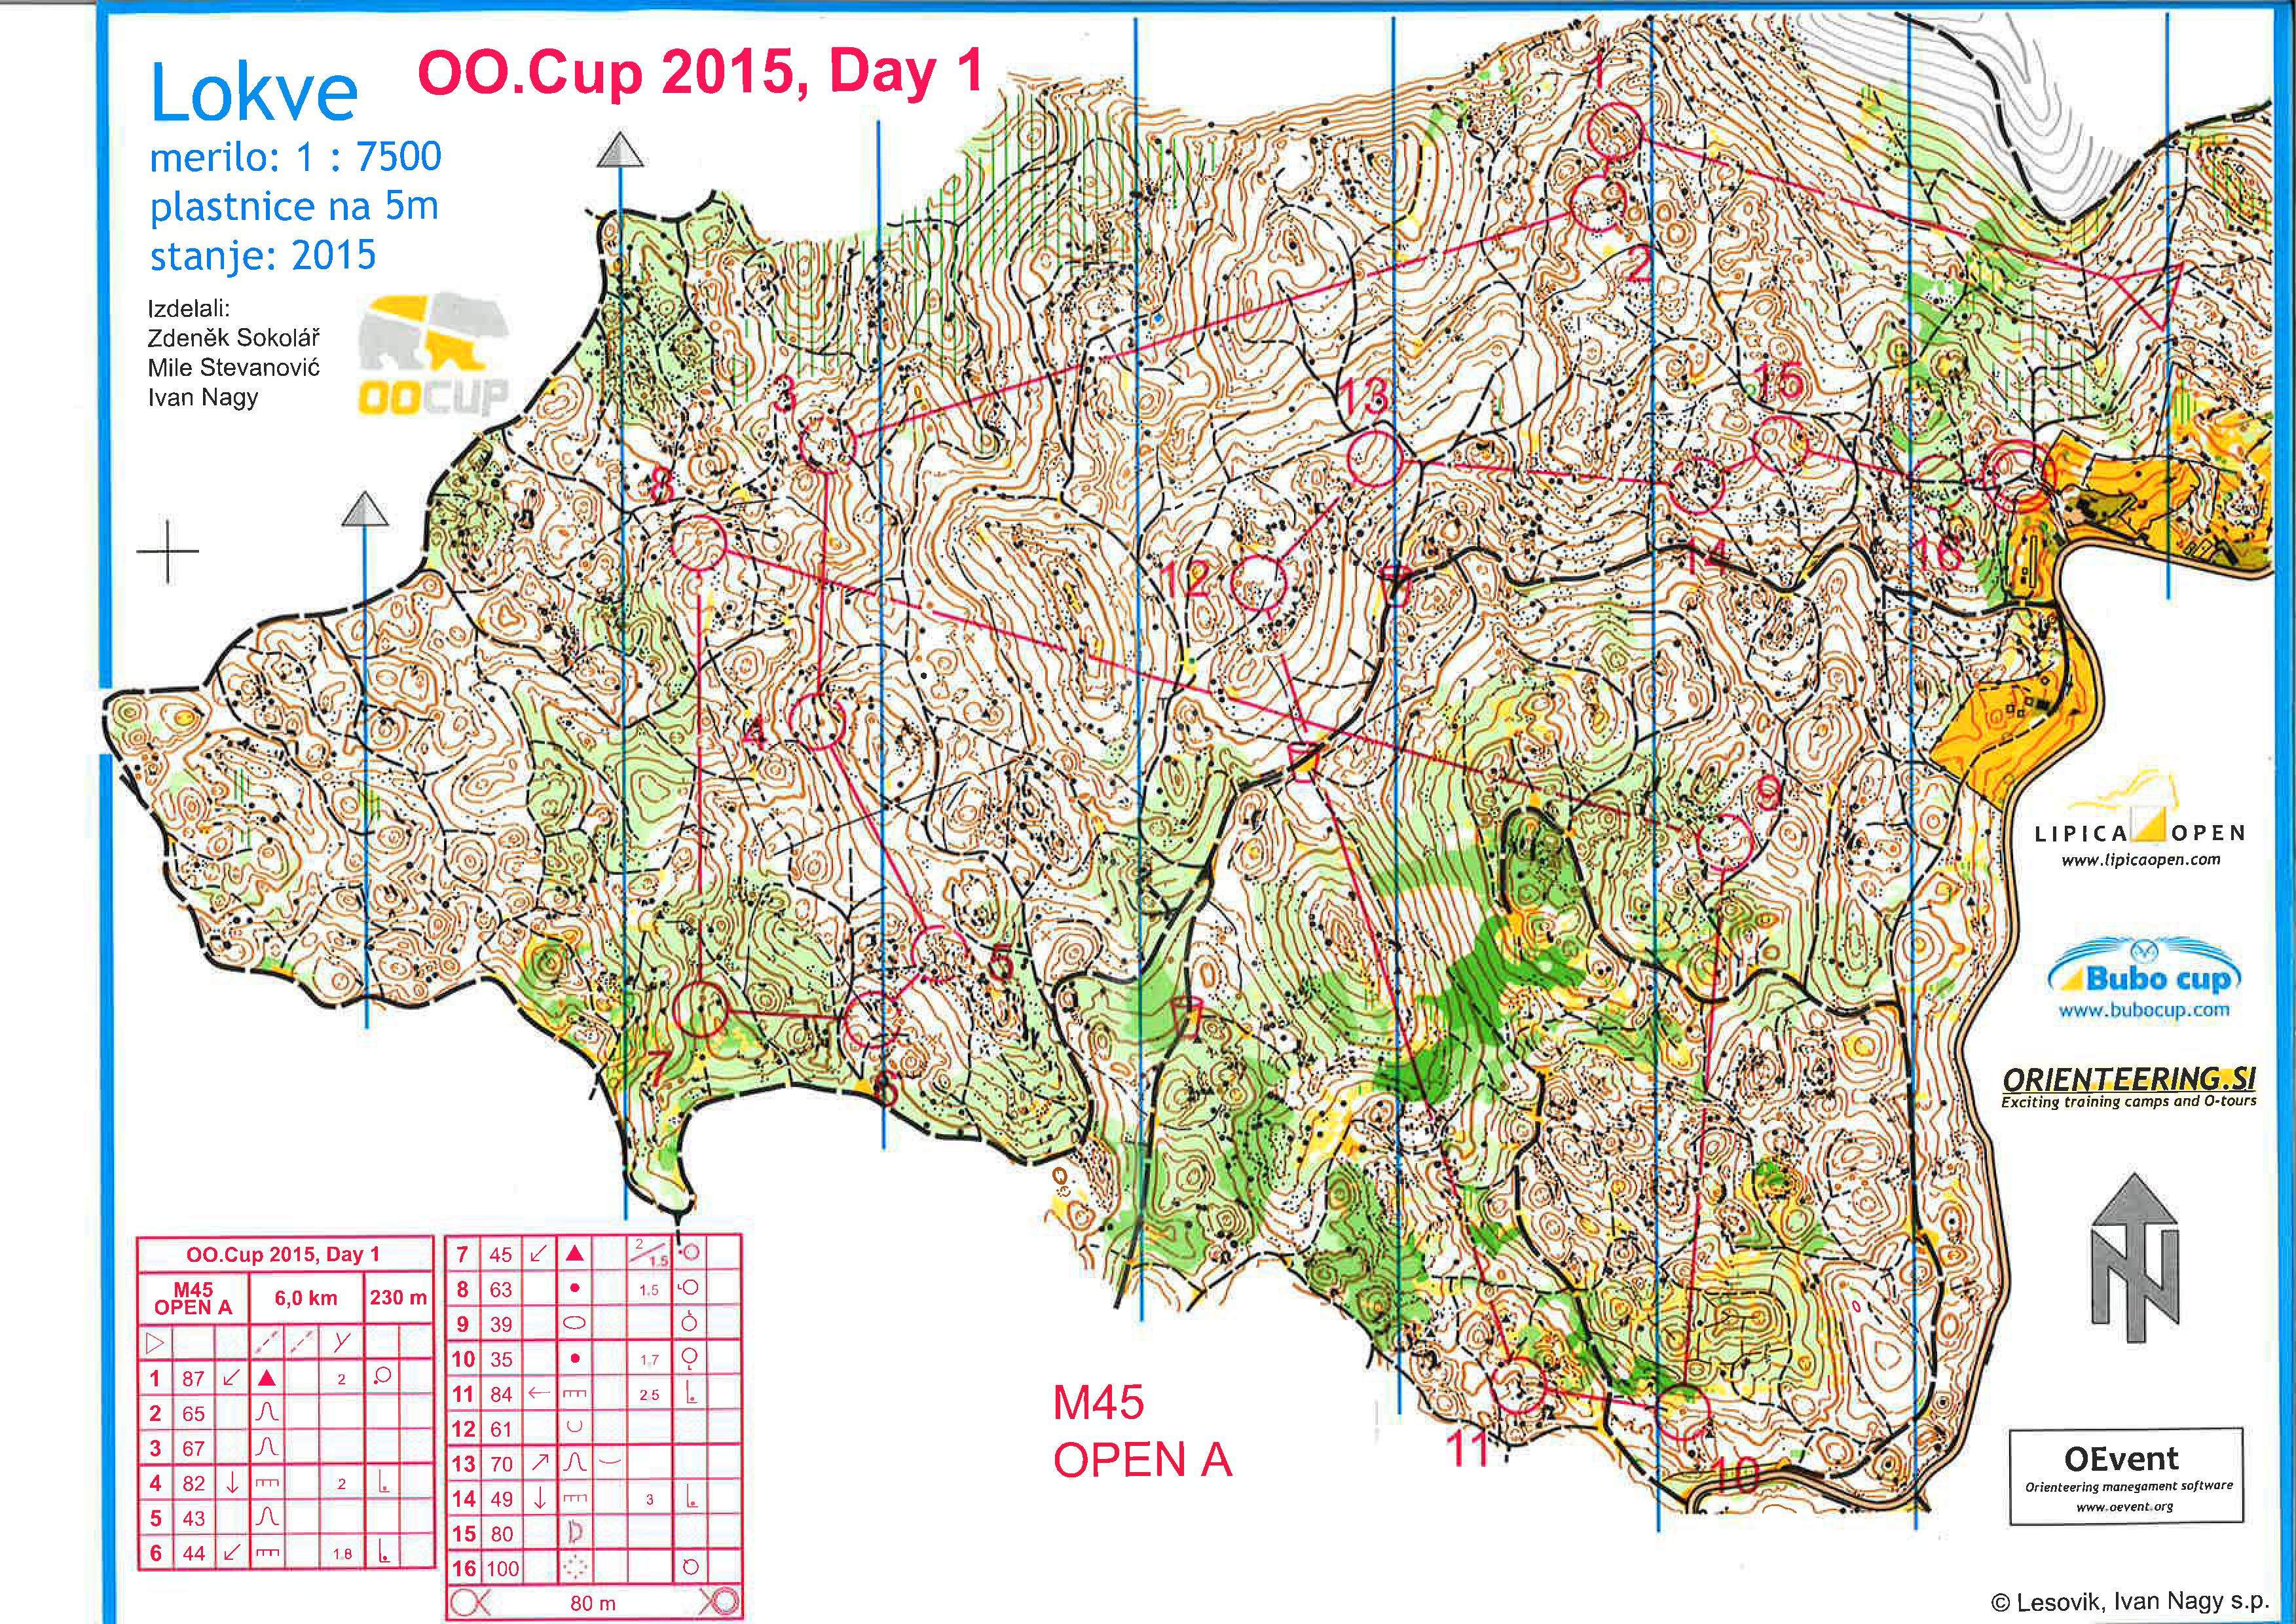 OOCup-Day1 (25-07-2015)